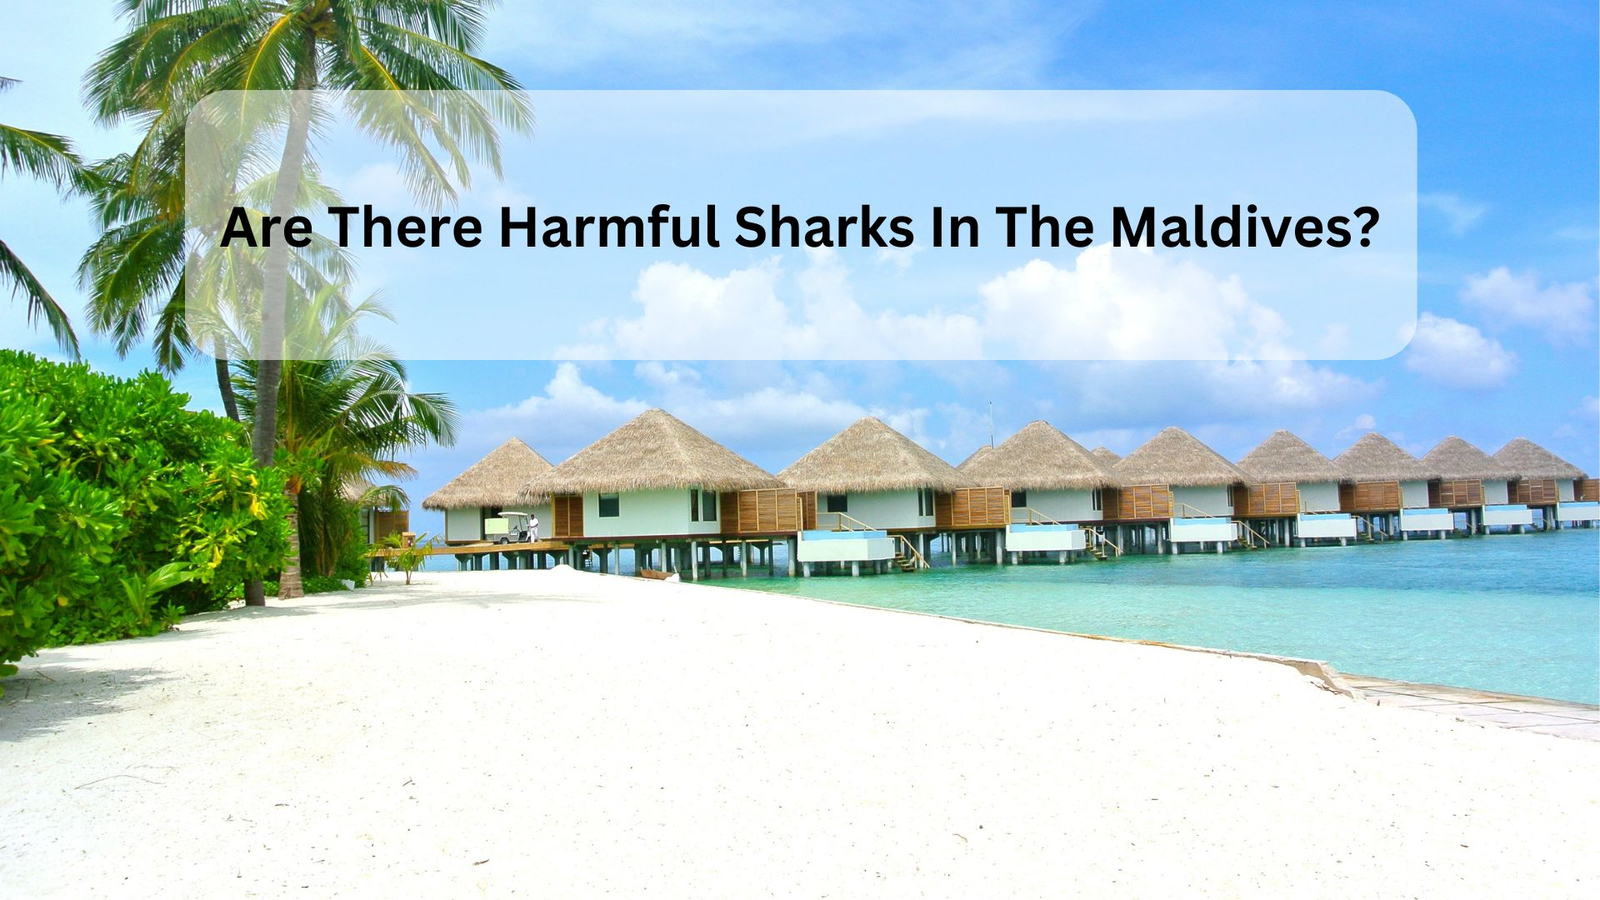 Are There Harmful Sharks In The Maldives?